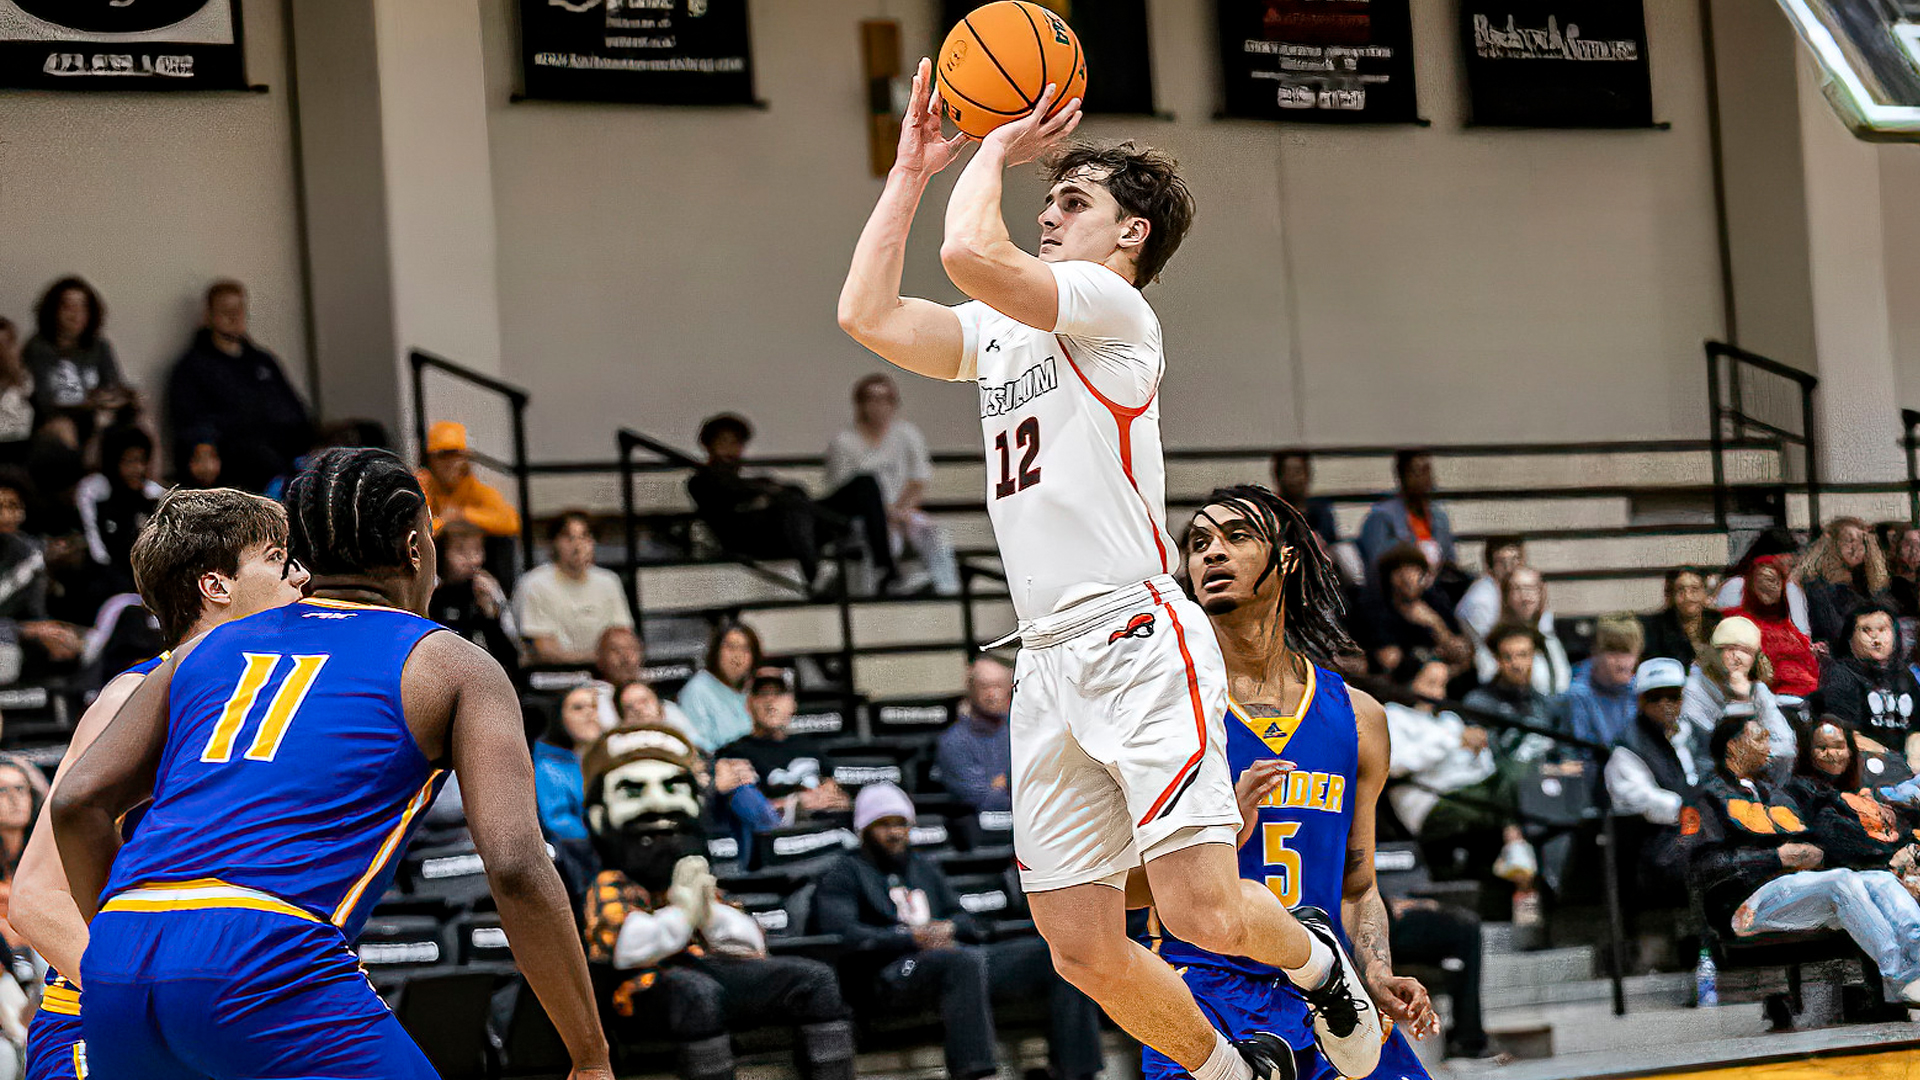 Connor Jordan scored a game-high 22 points in Tusculum's 83-77 win over Lander (photo by Chuck Williams)